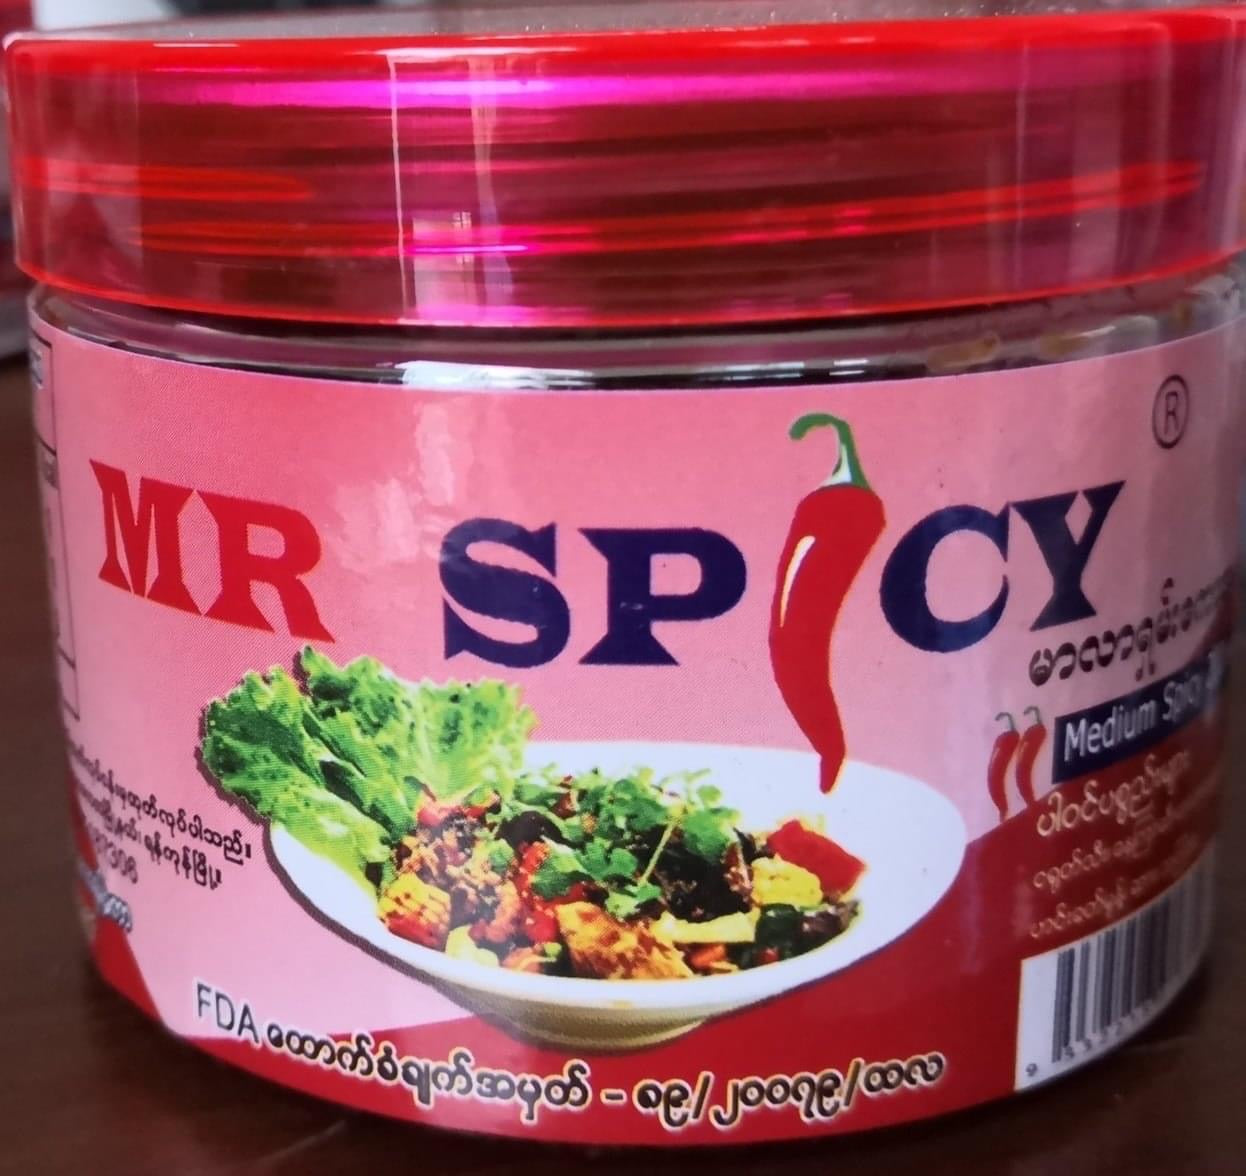 MR Spicy (Med Spicy)